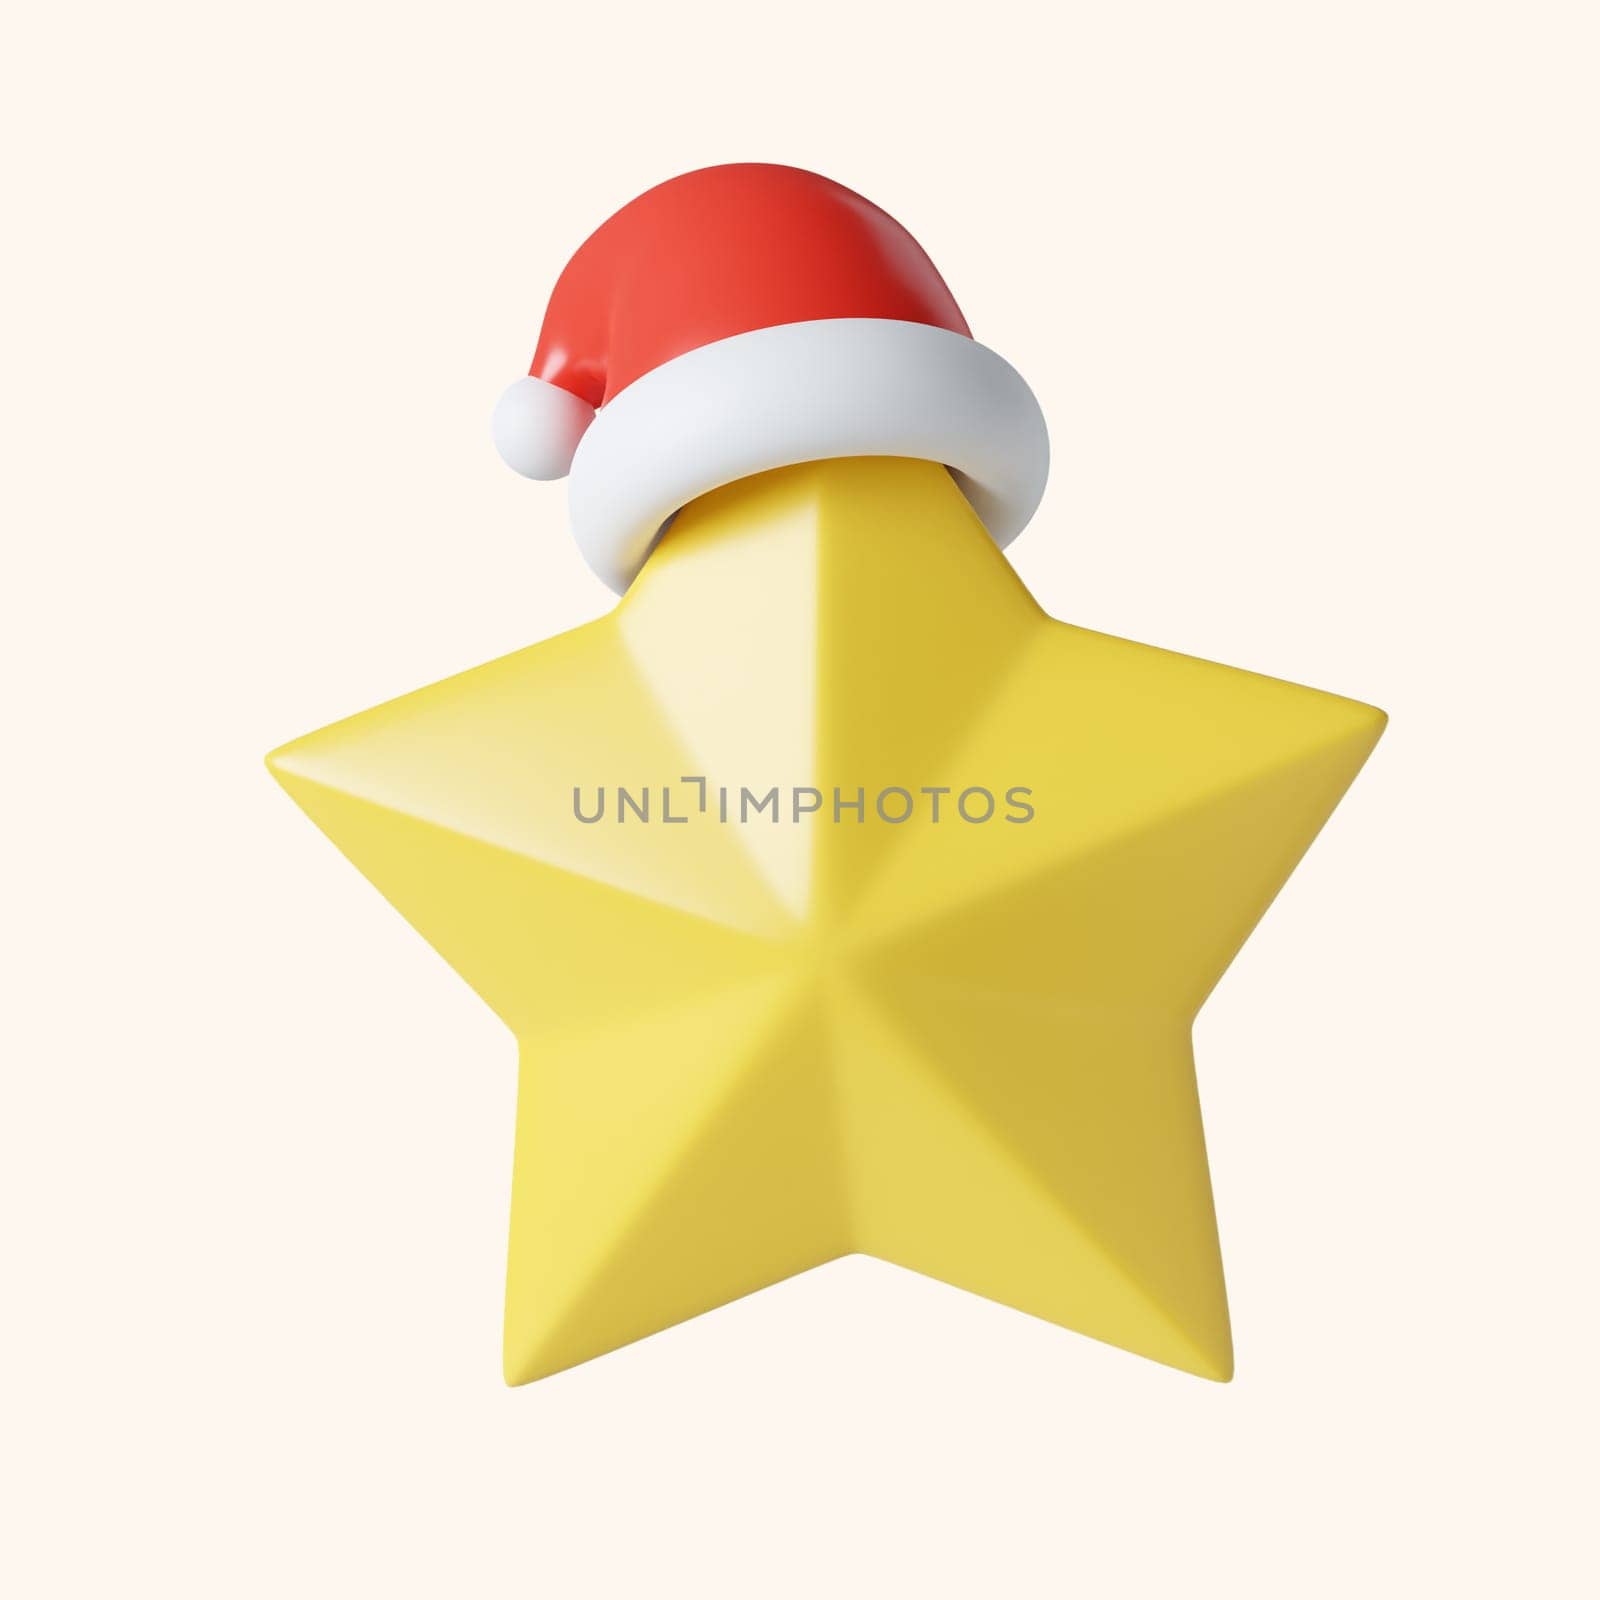 3d Christmas star icon. minimal decorative festive conical shape tree. New Year's holiday decor. 3d design element In cartoon style. Icon isolated on white background. 3D illustration by meepiangraphic